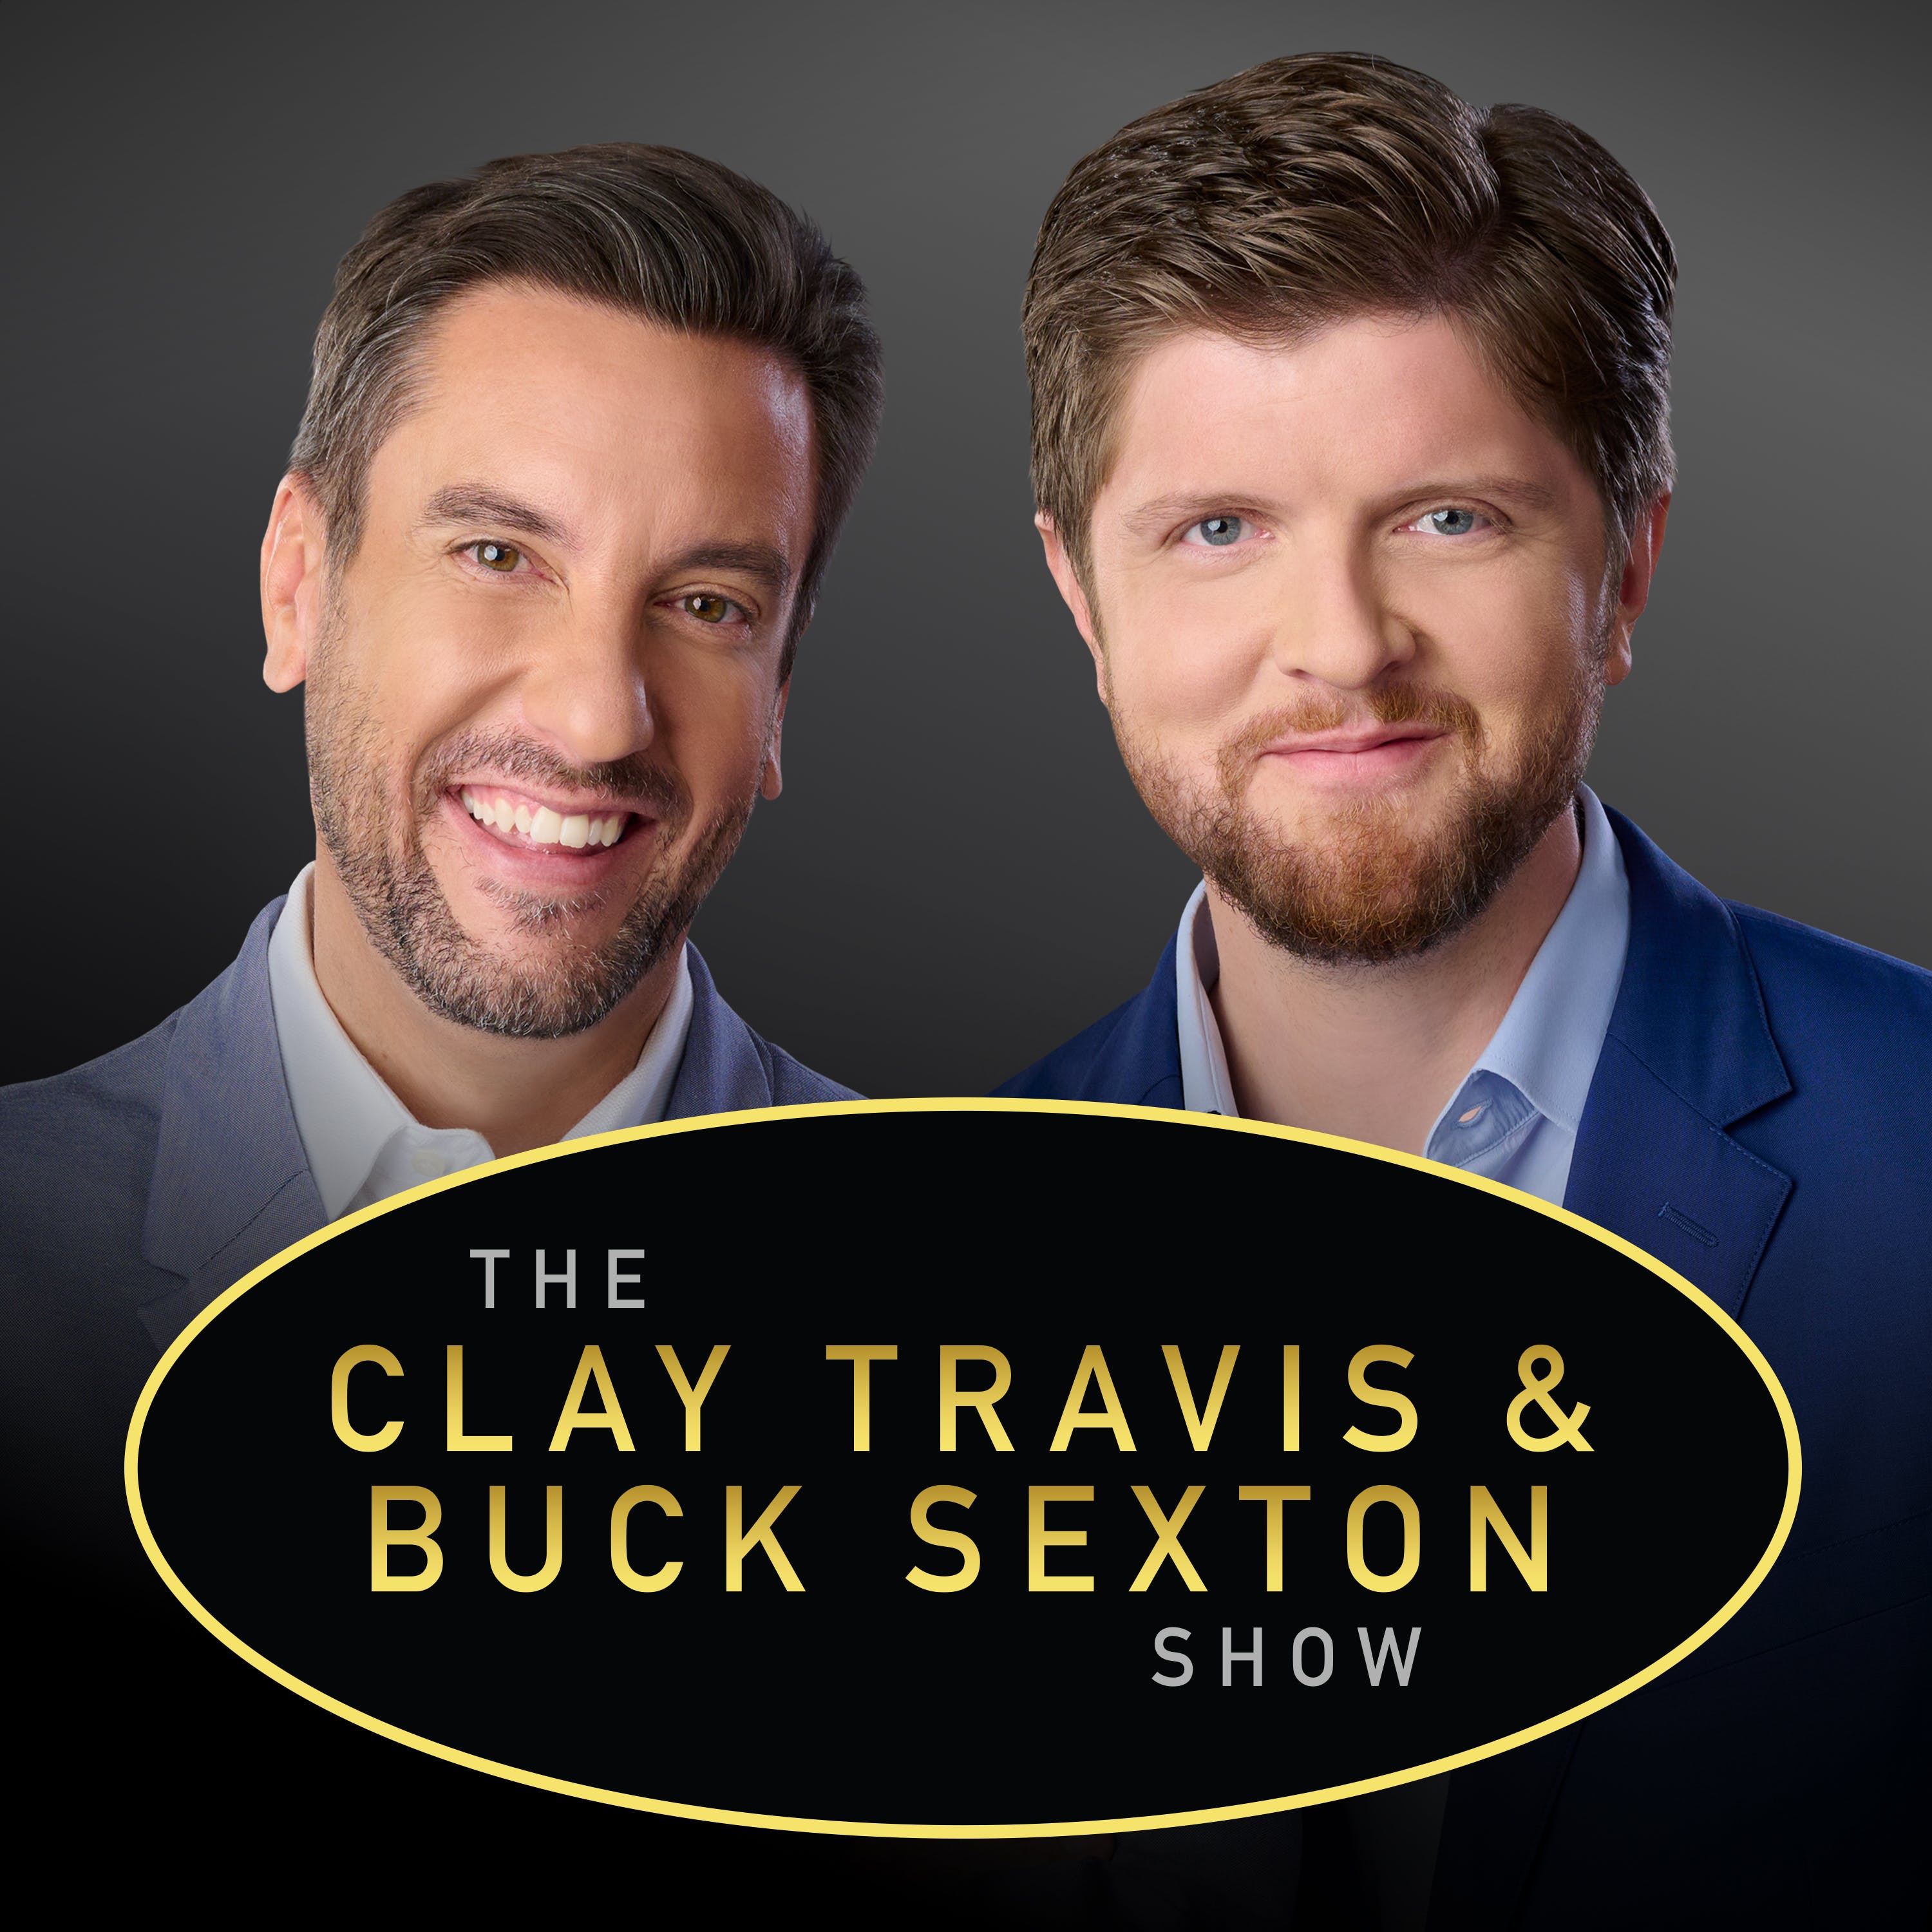 The Clay Travis and Buck Sexton Show podcast show image